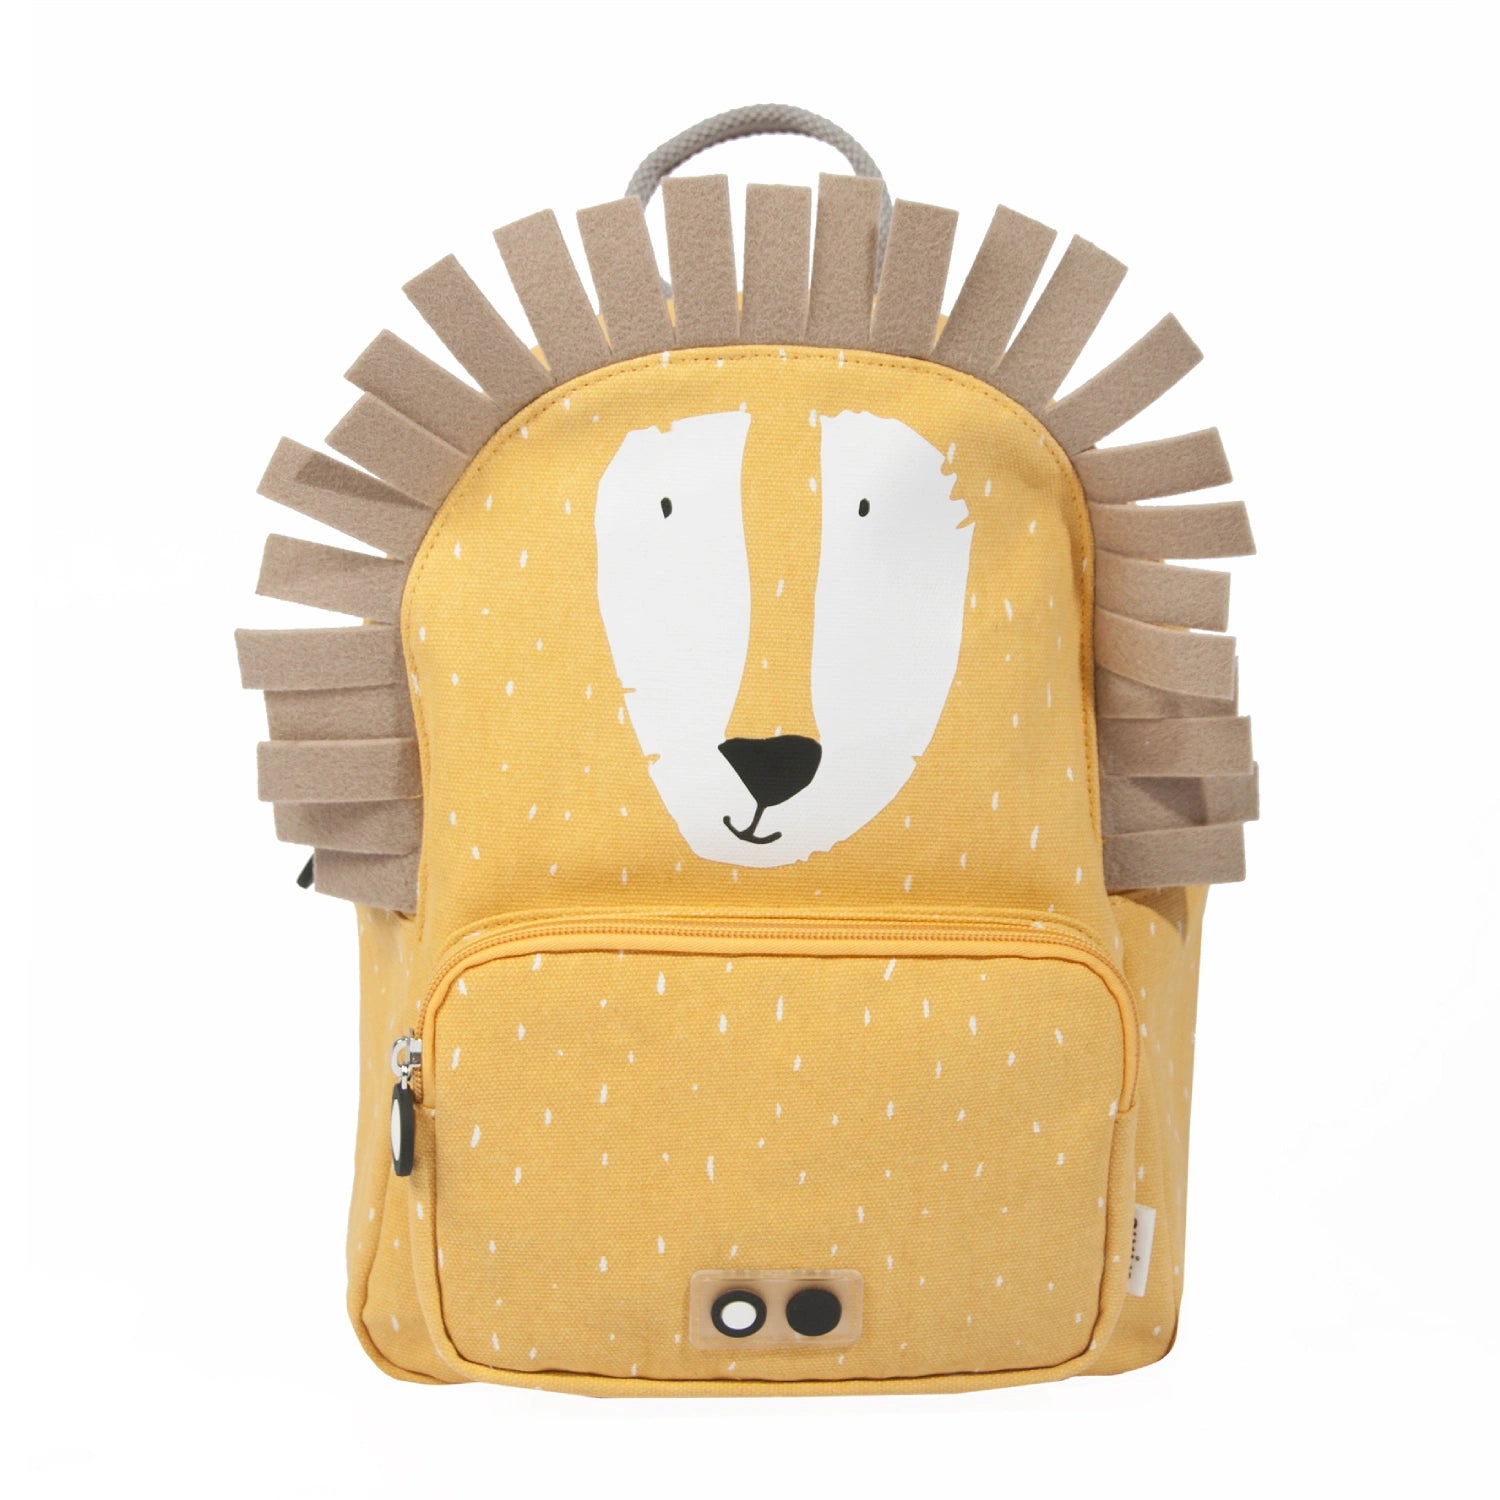 An image of Kids School Backpack - Trixie Bag Collection Mr. Lion